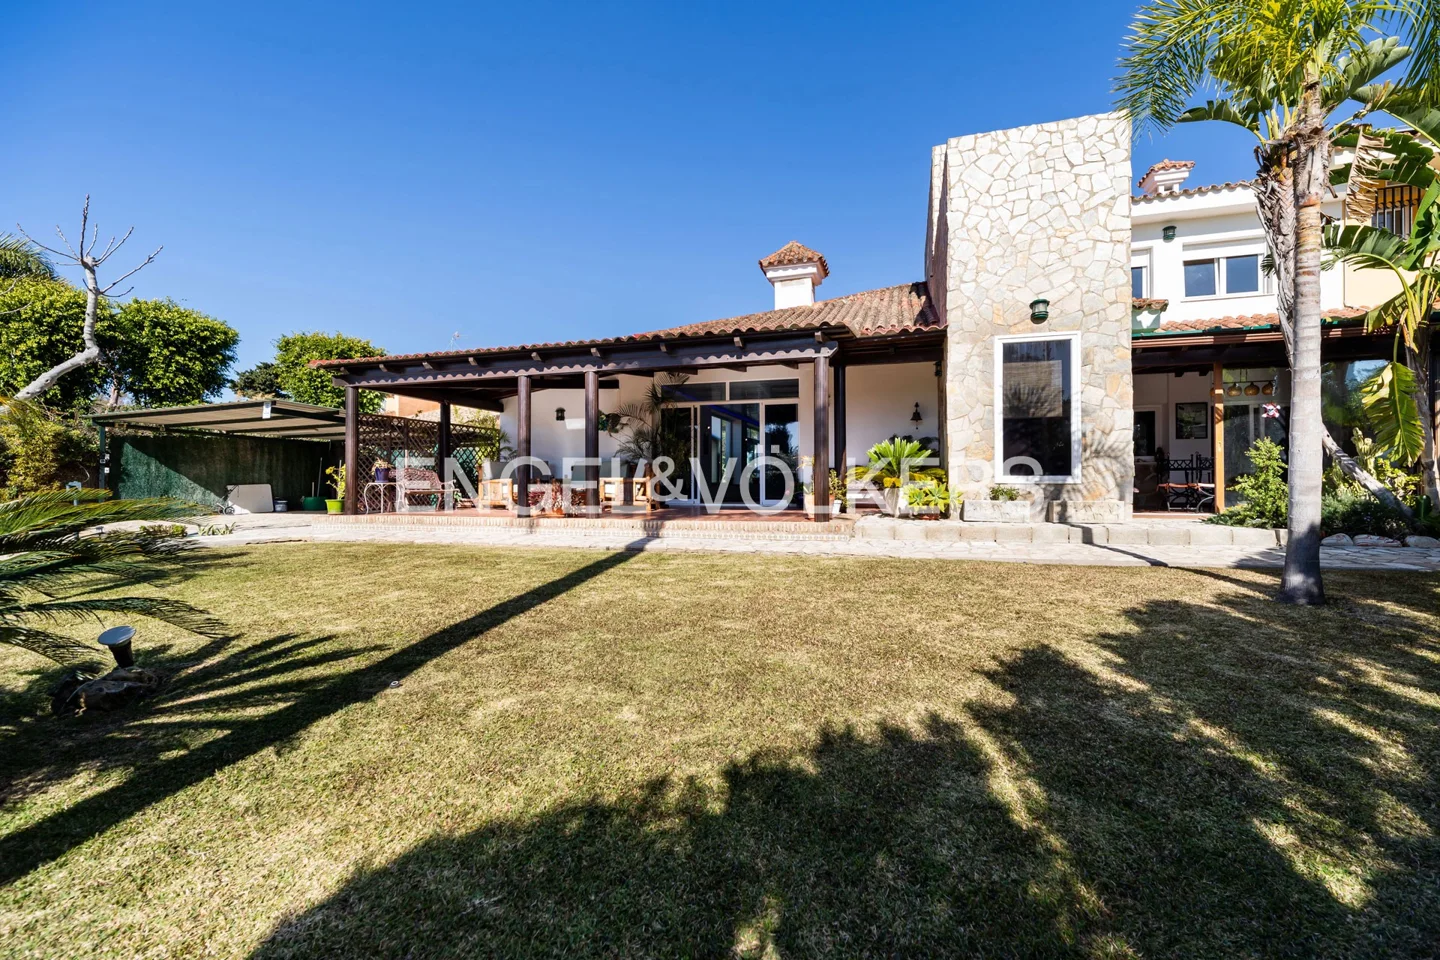 Magnificent villa with in-door swimming pool in Vistahermosa